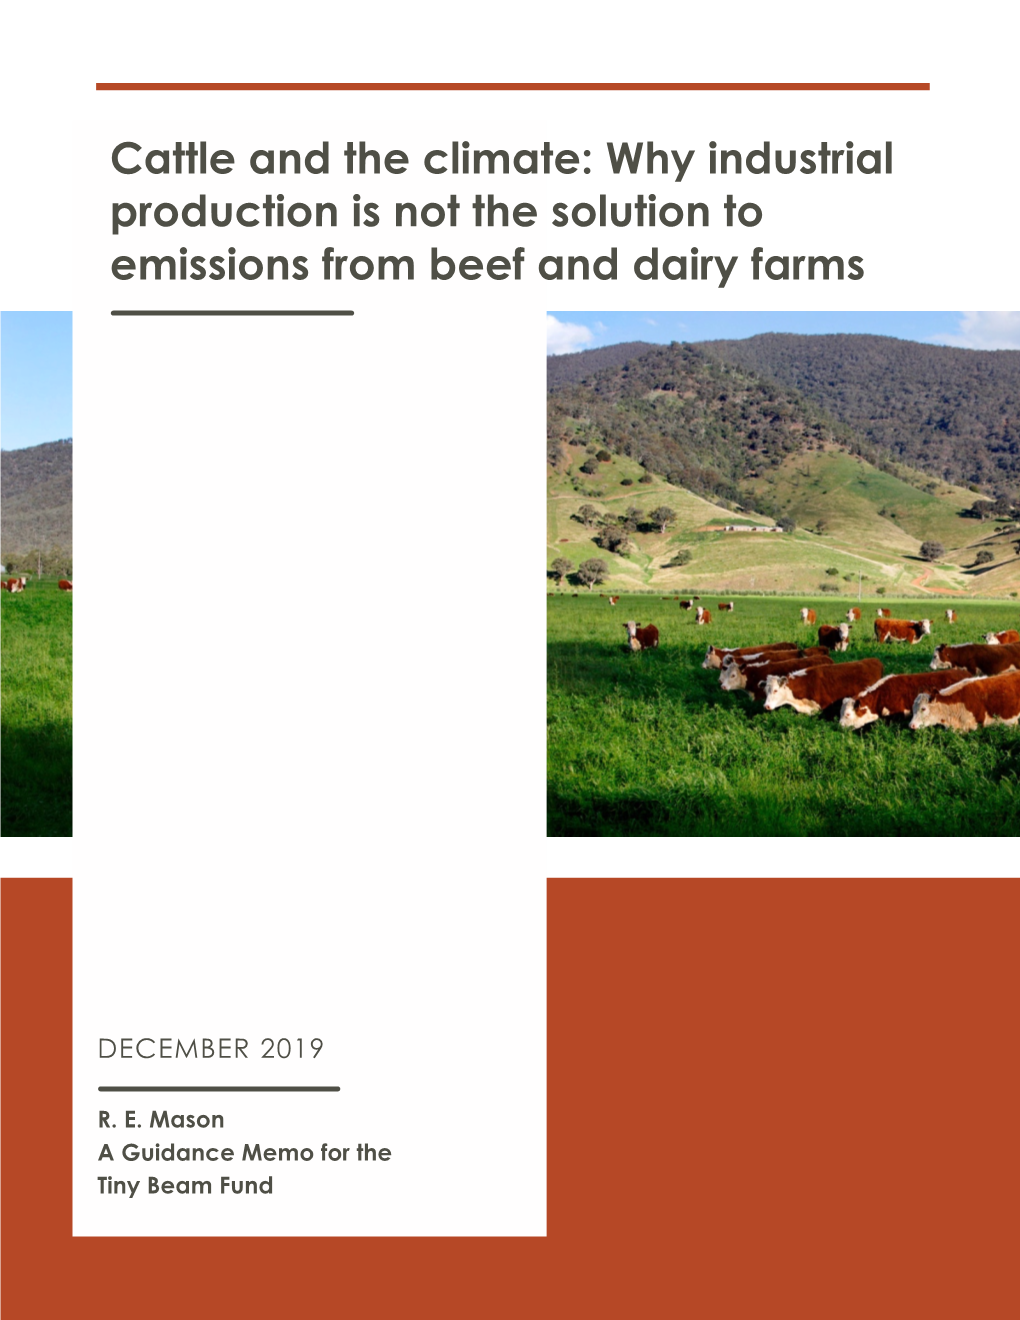 Cattle and the Climate: Why Industrial Production Is Not the Solution to Emissions from Beef and Dairy Farms